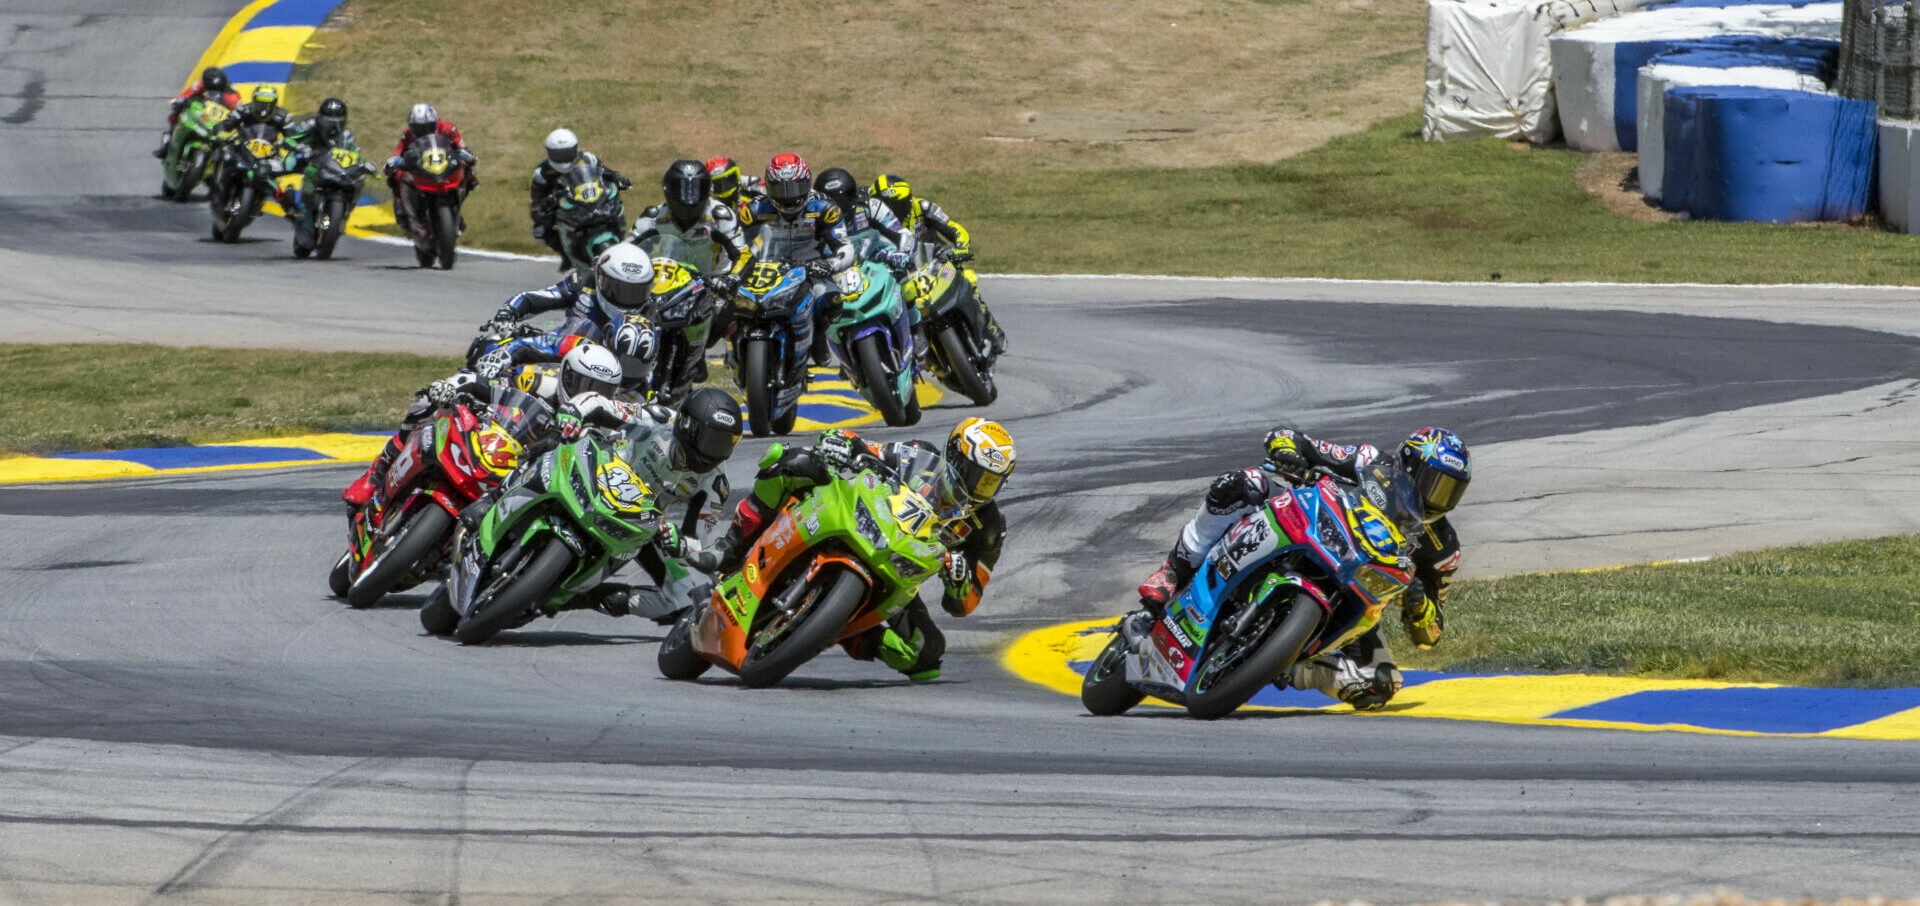 Max Van (48) leading Junior Cup Race Two at Road Atlanta. Photo by Brian J. Nelson.